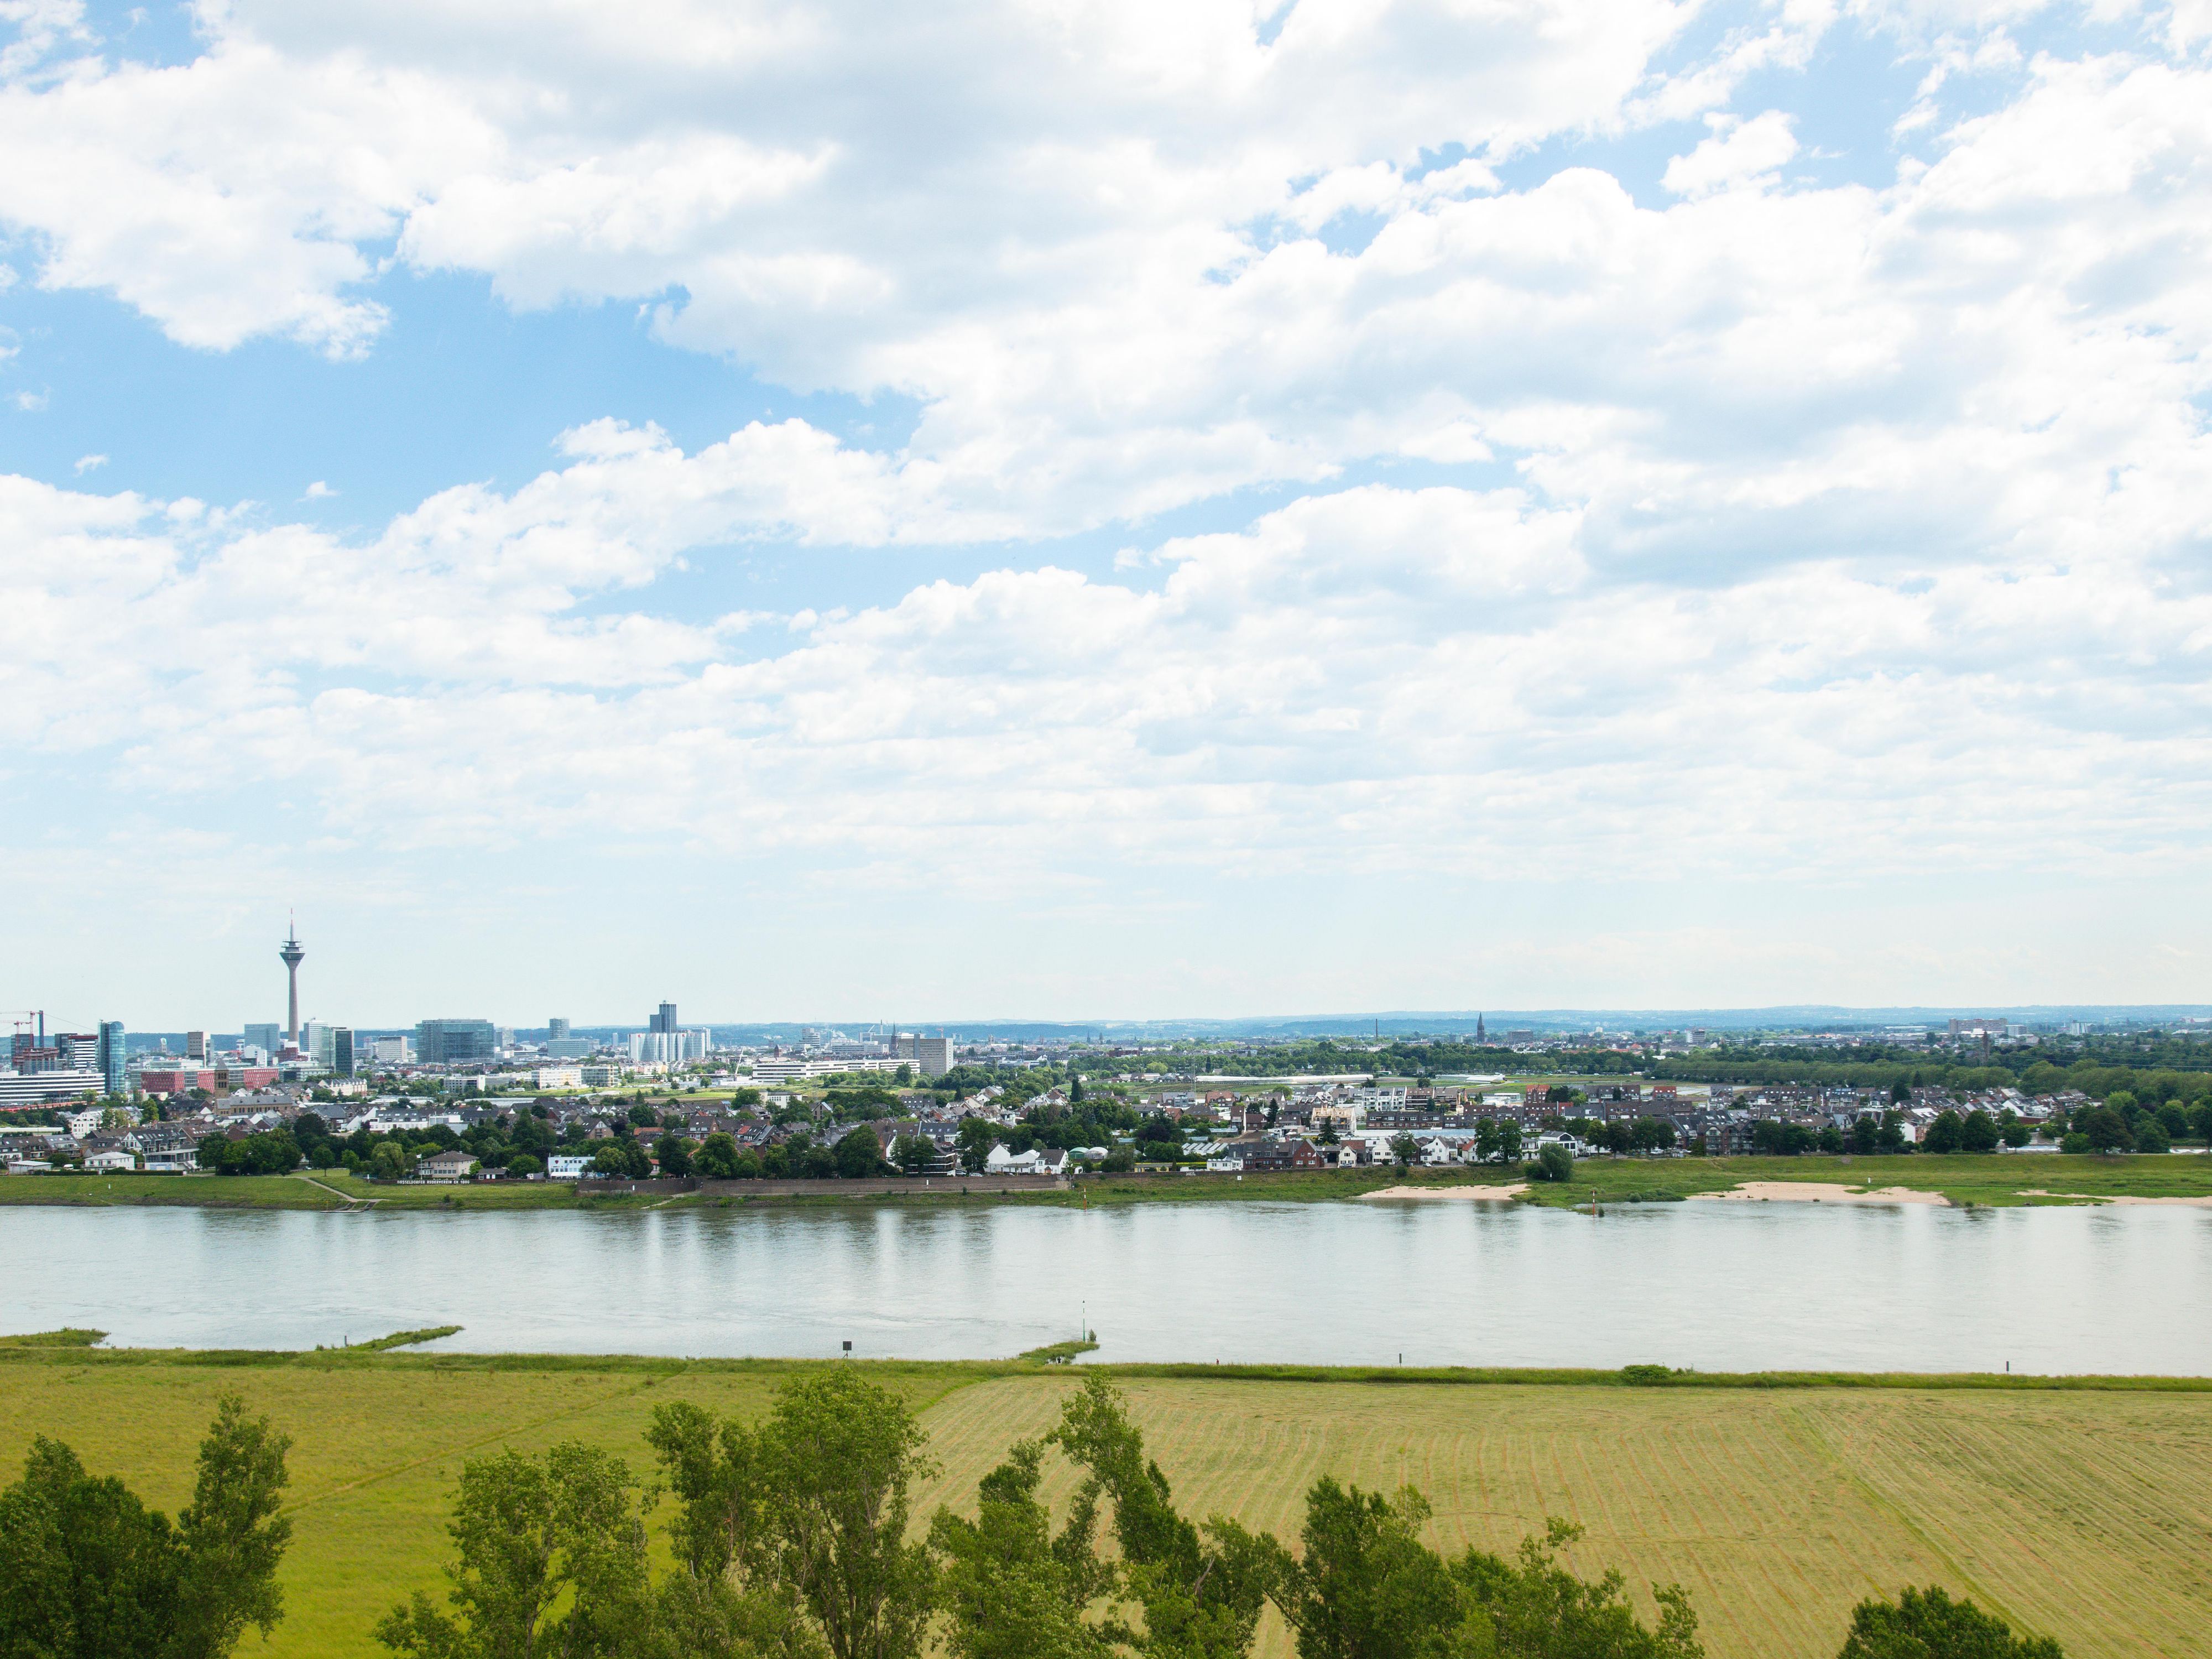 The Crowne Plaza Düsseldorf - Neuss Hotel is located directly on the left bank of the Rhine and offers a wonderful view of the state capital Düsseldorf. You can see the Rhine from each of our 246 rooms.